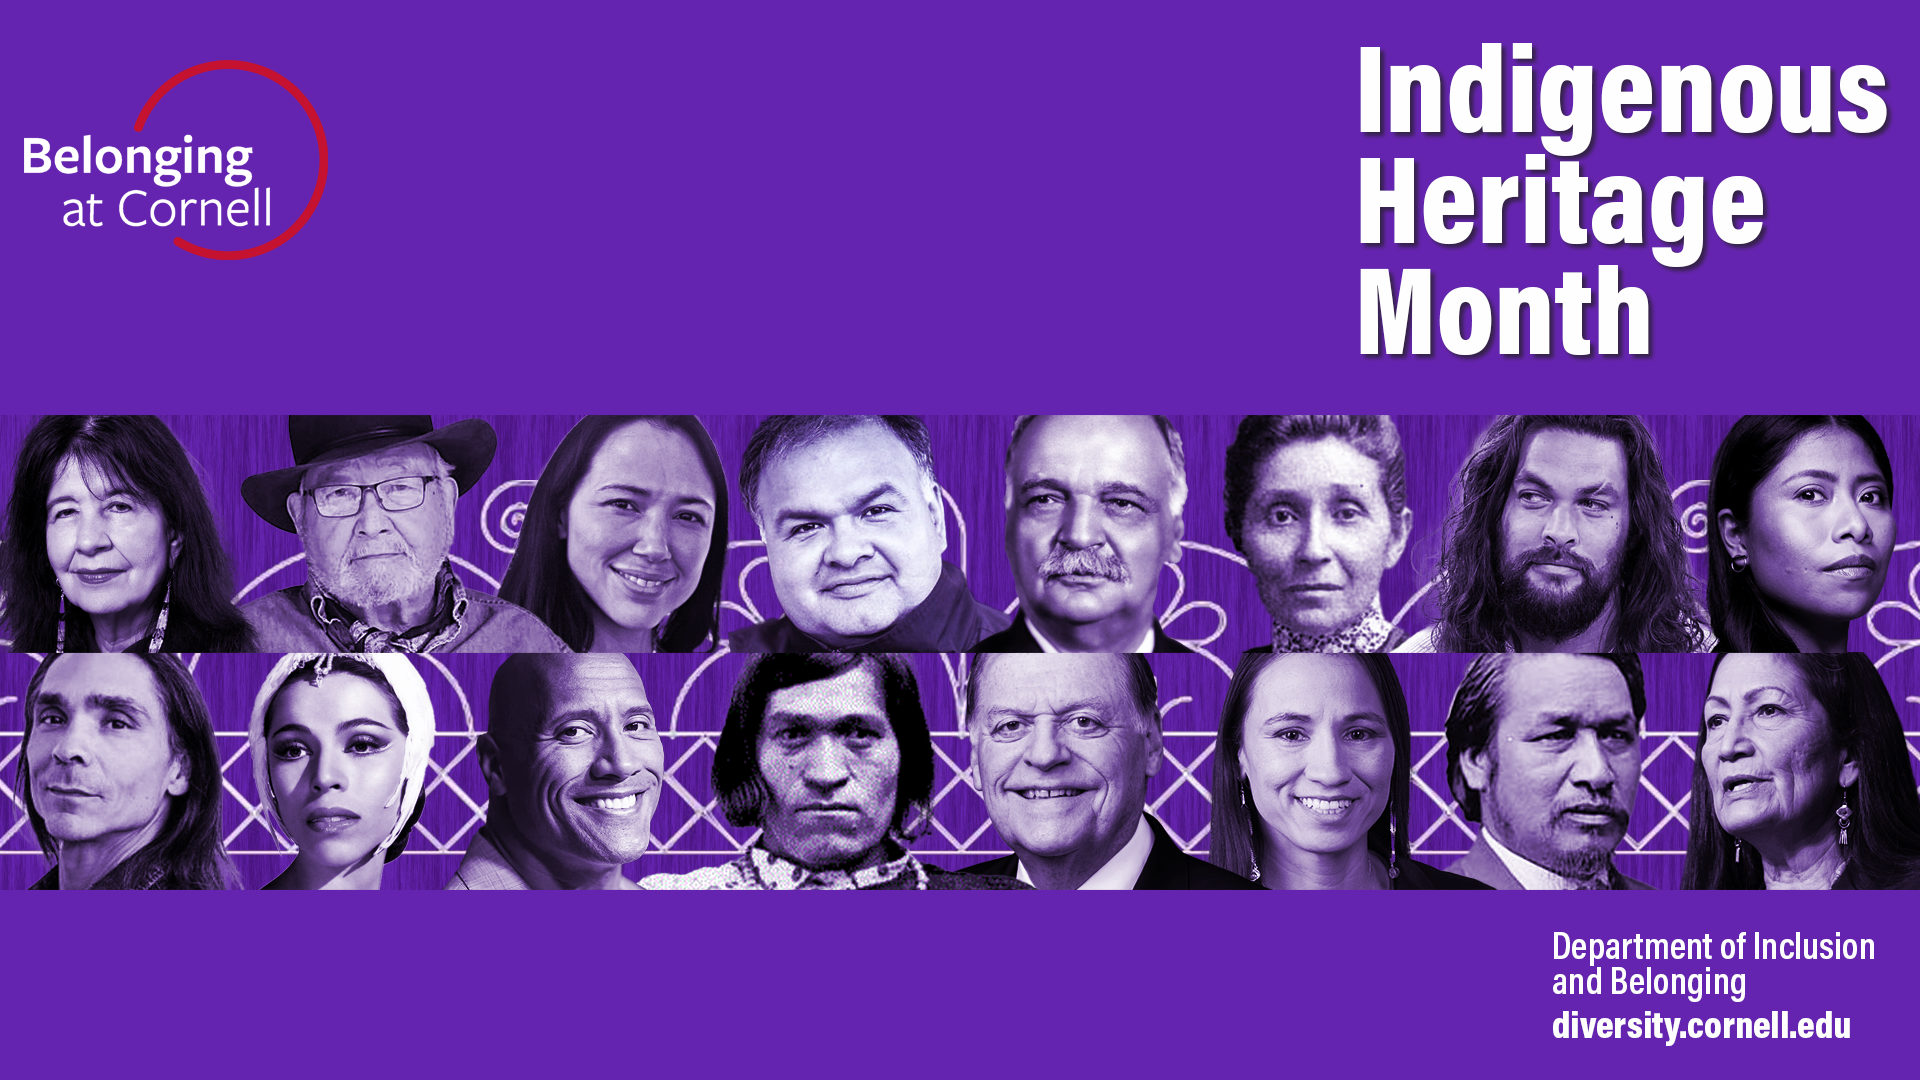 zoom background, purple with 18 faces of notable indigenous people